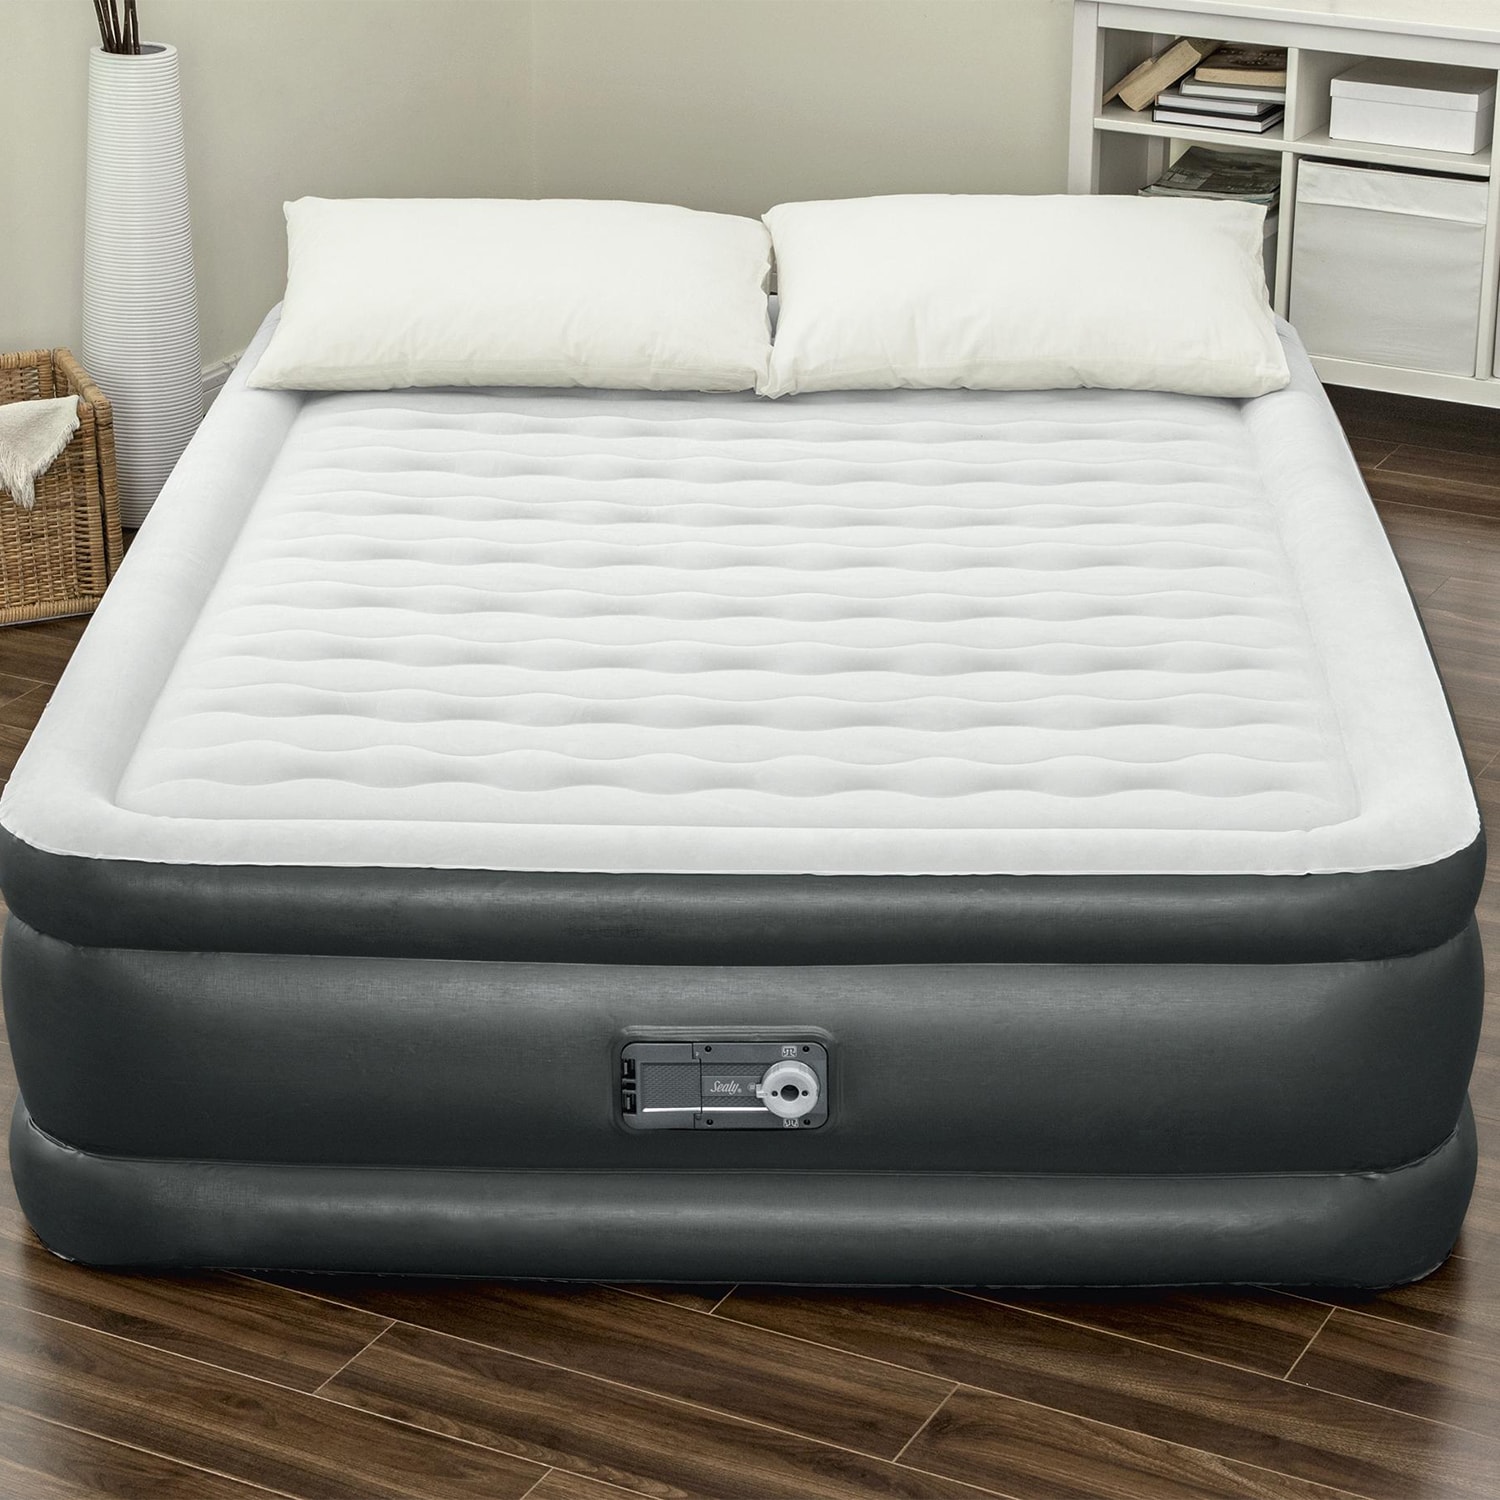 NXONE Air Mattress,18 inch Inflatable Airbed Luxury Double High Self I